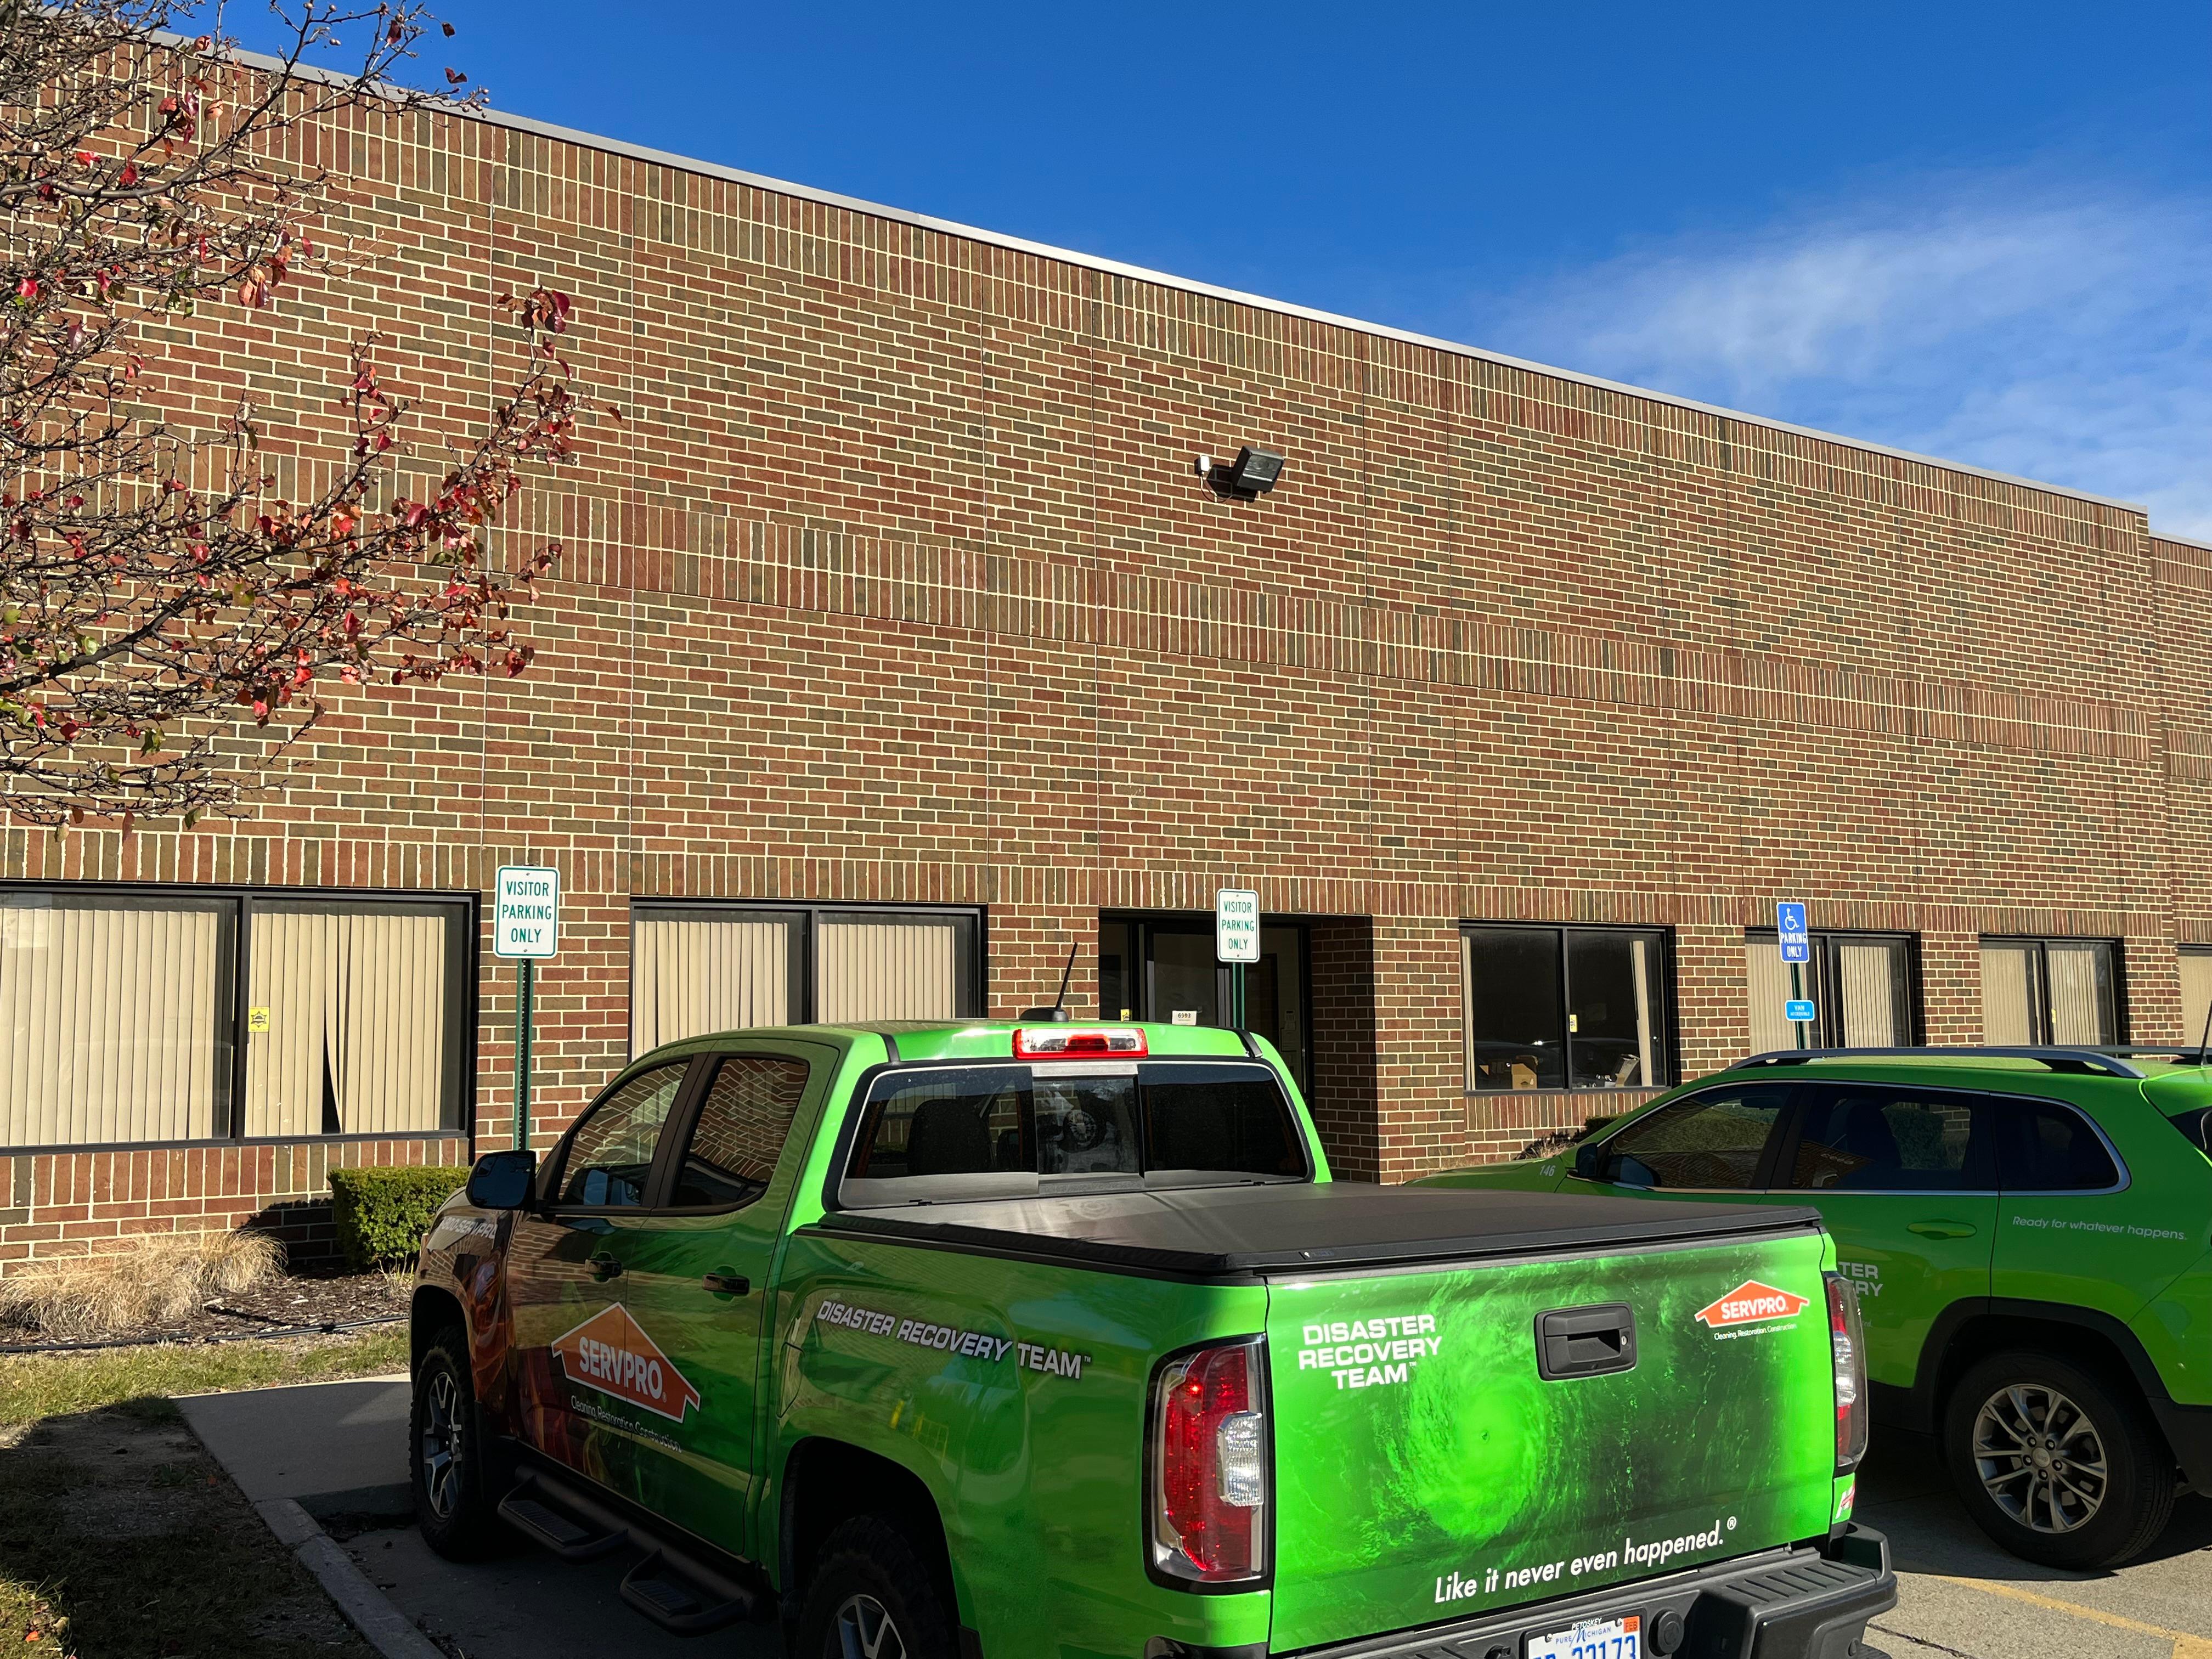 SERVPRO of West Sterling Heights is centrally located to service Sterling Heights, Pontiac, Auburn Hills, Southfield, Fraser, and the surrounding area for all fire, water, and storm damage needs.